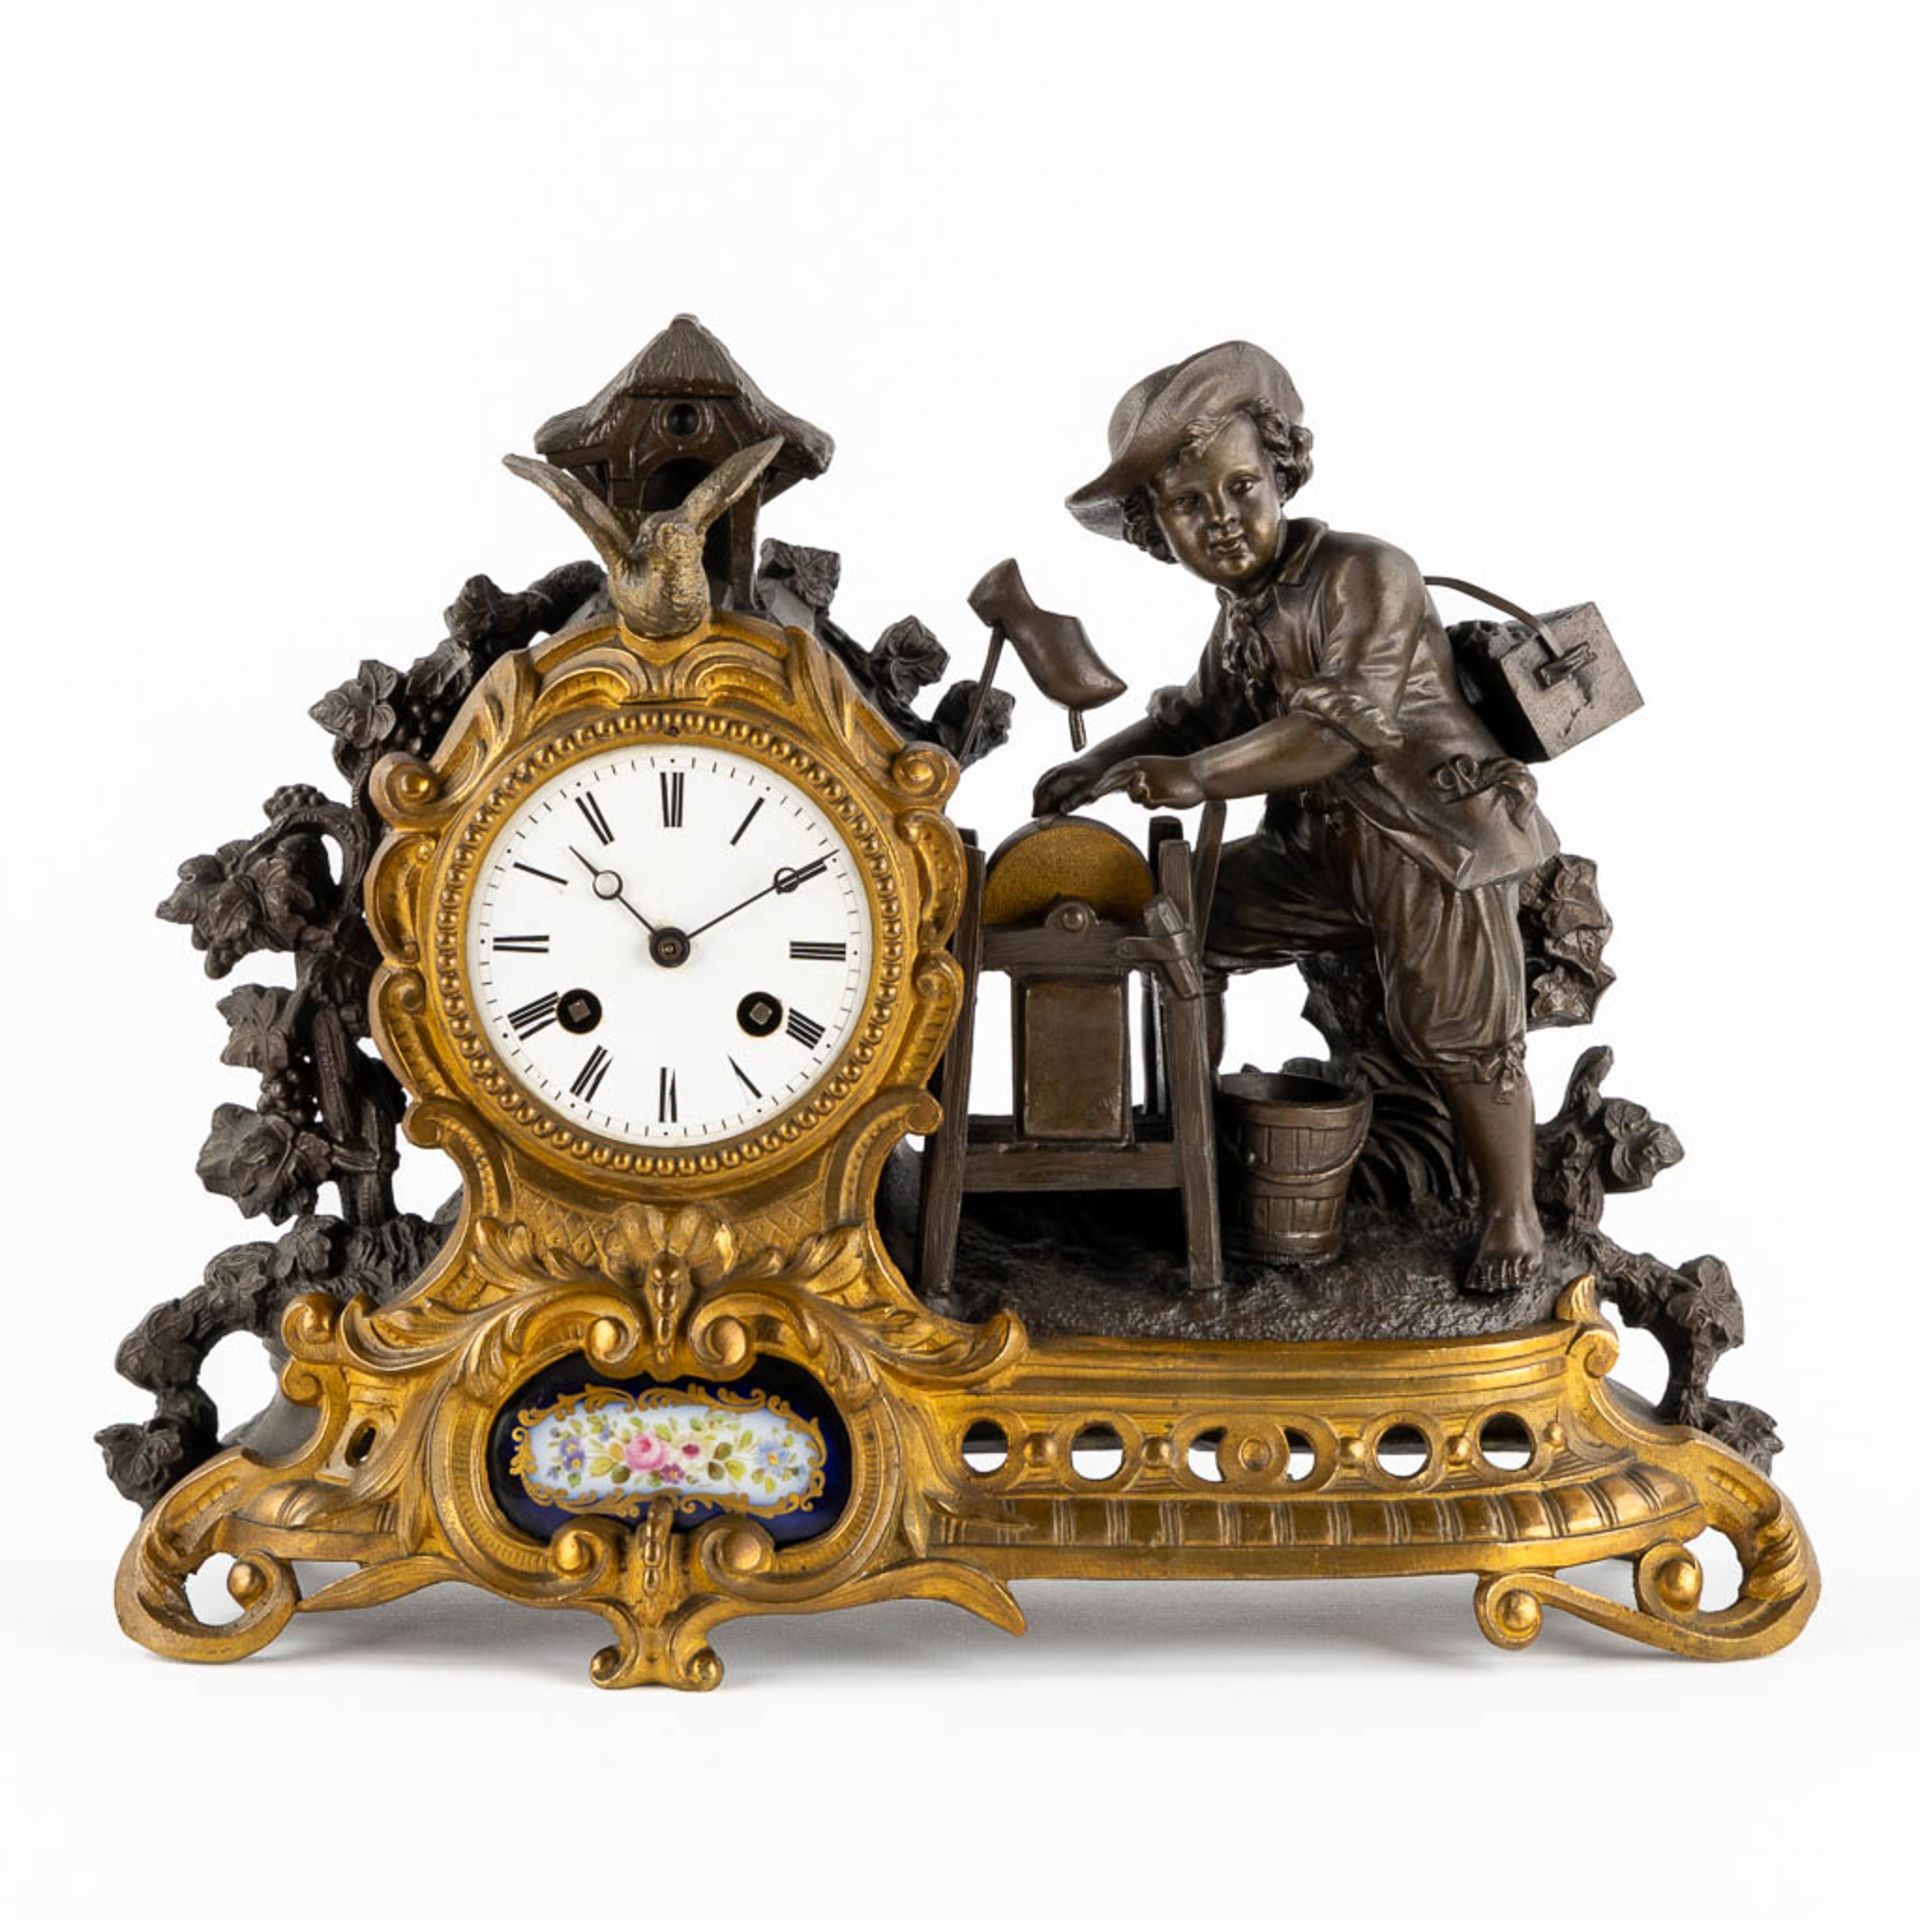 A mantle clock, patinated and bronze and spelter, image of a Wooden shoemaker. 19th C. (L:12 x W:36